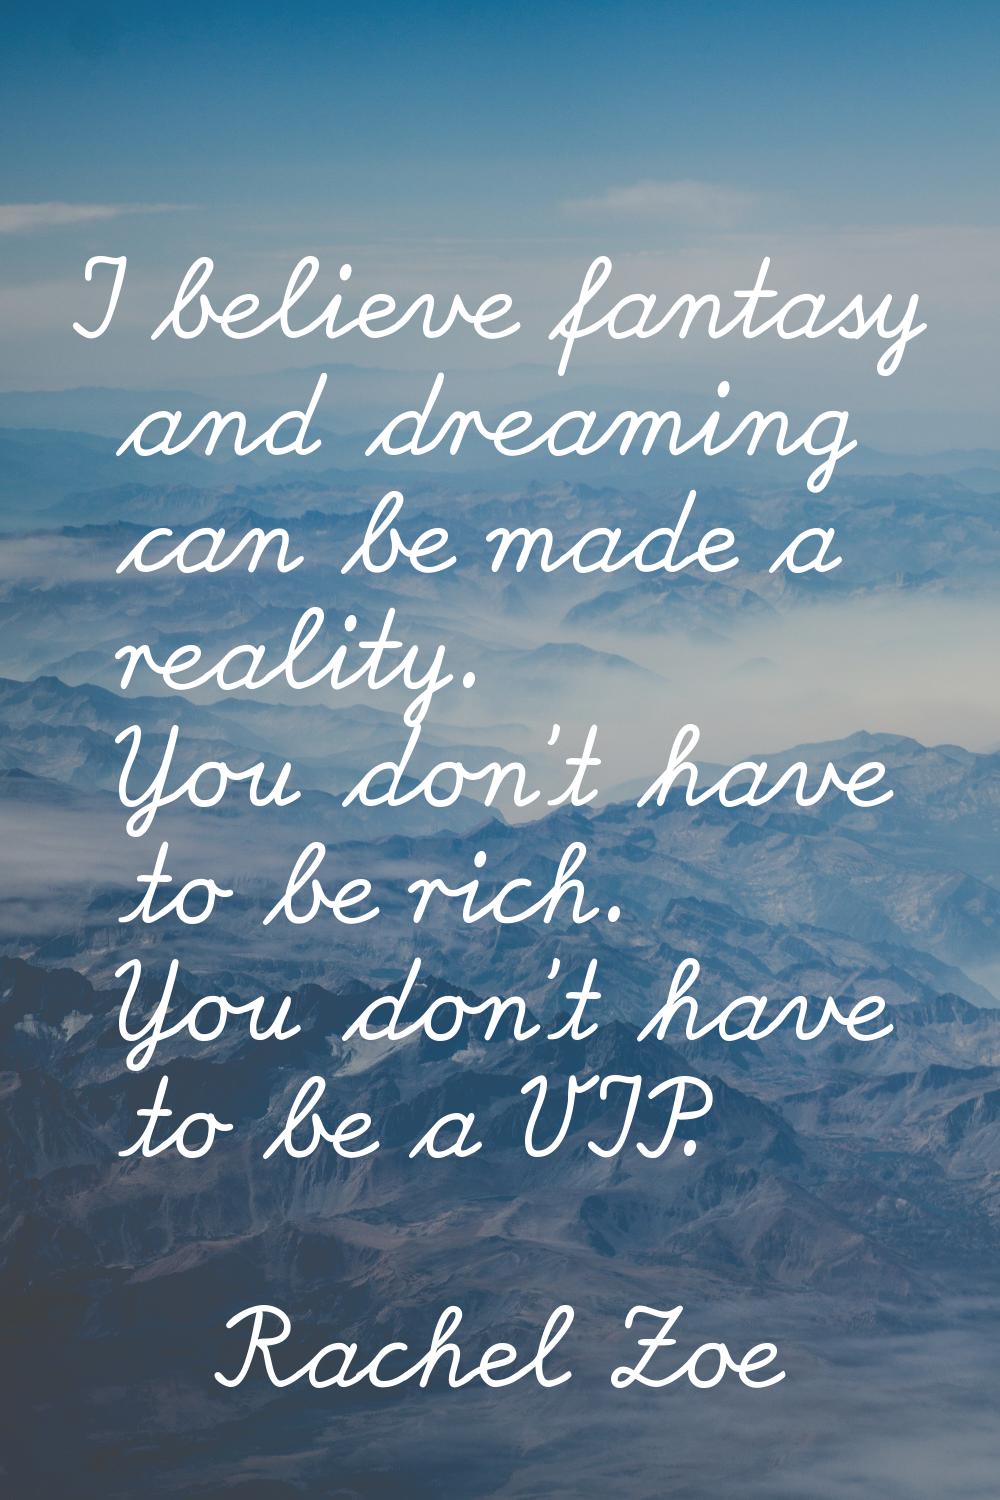 I believe fantasy and dreaming can be made a reality. You don't have to be rich. You don't have to 